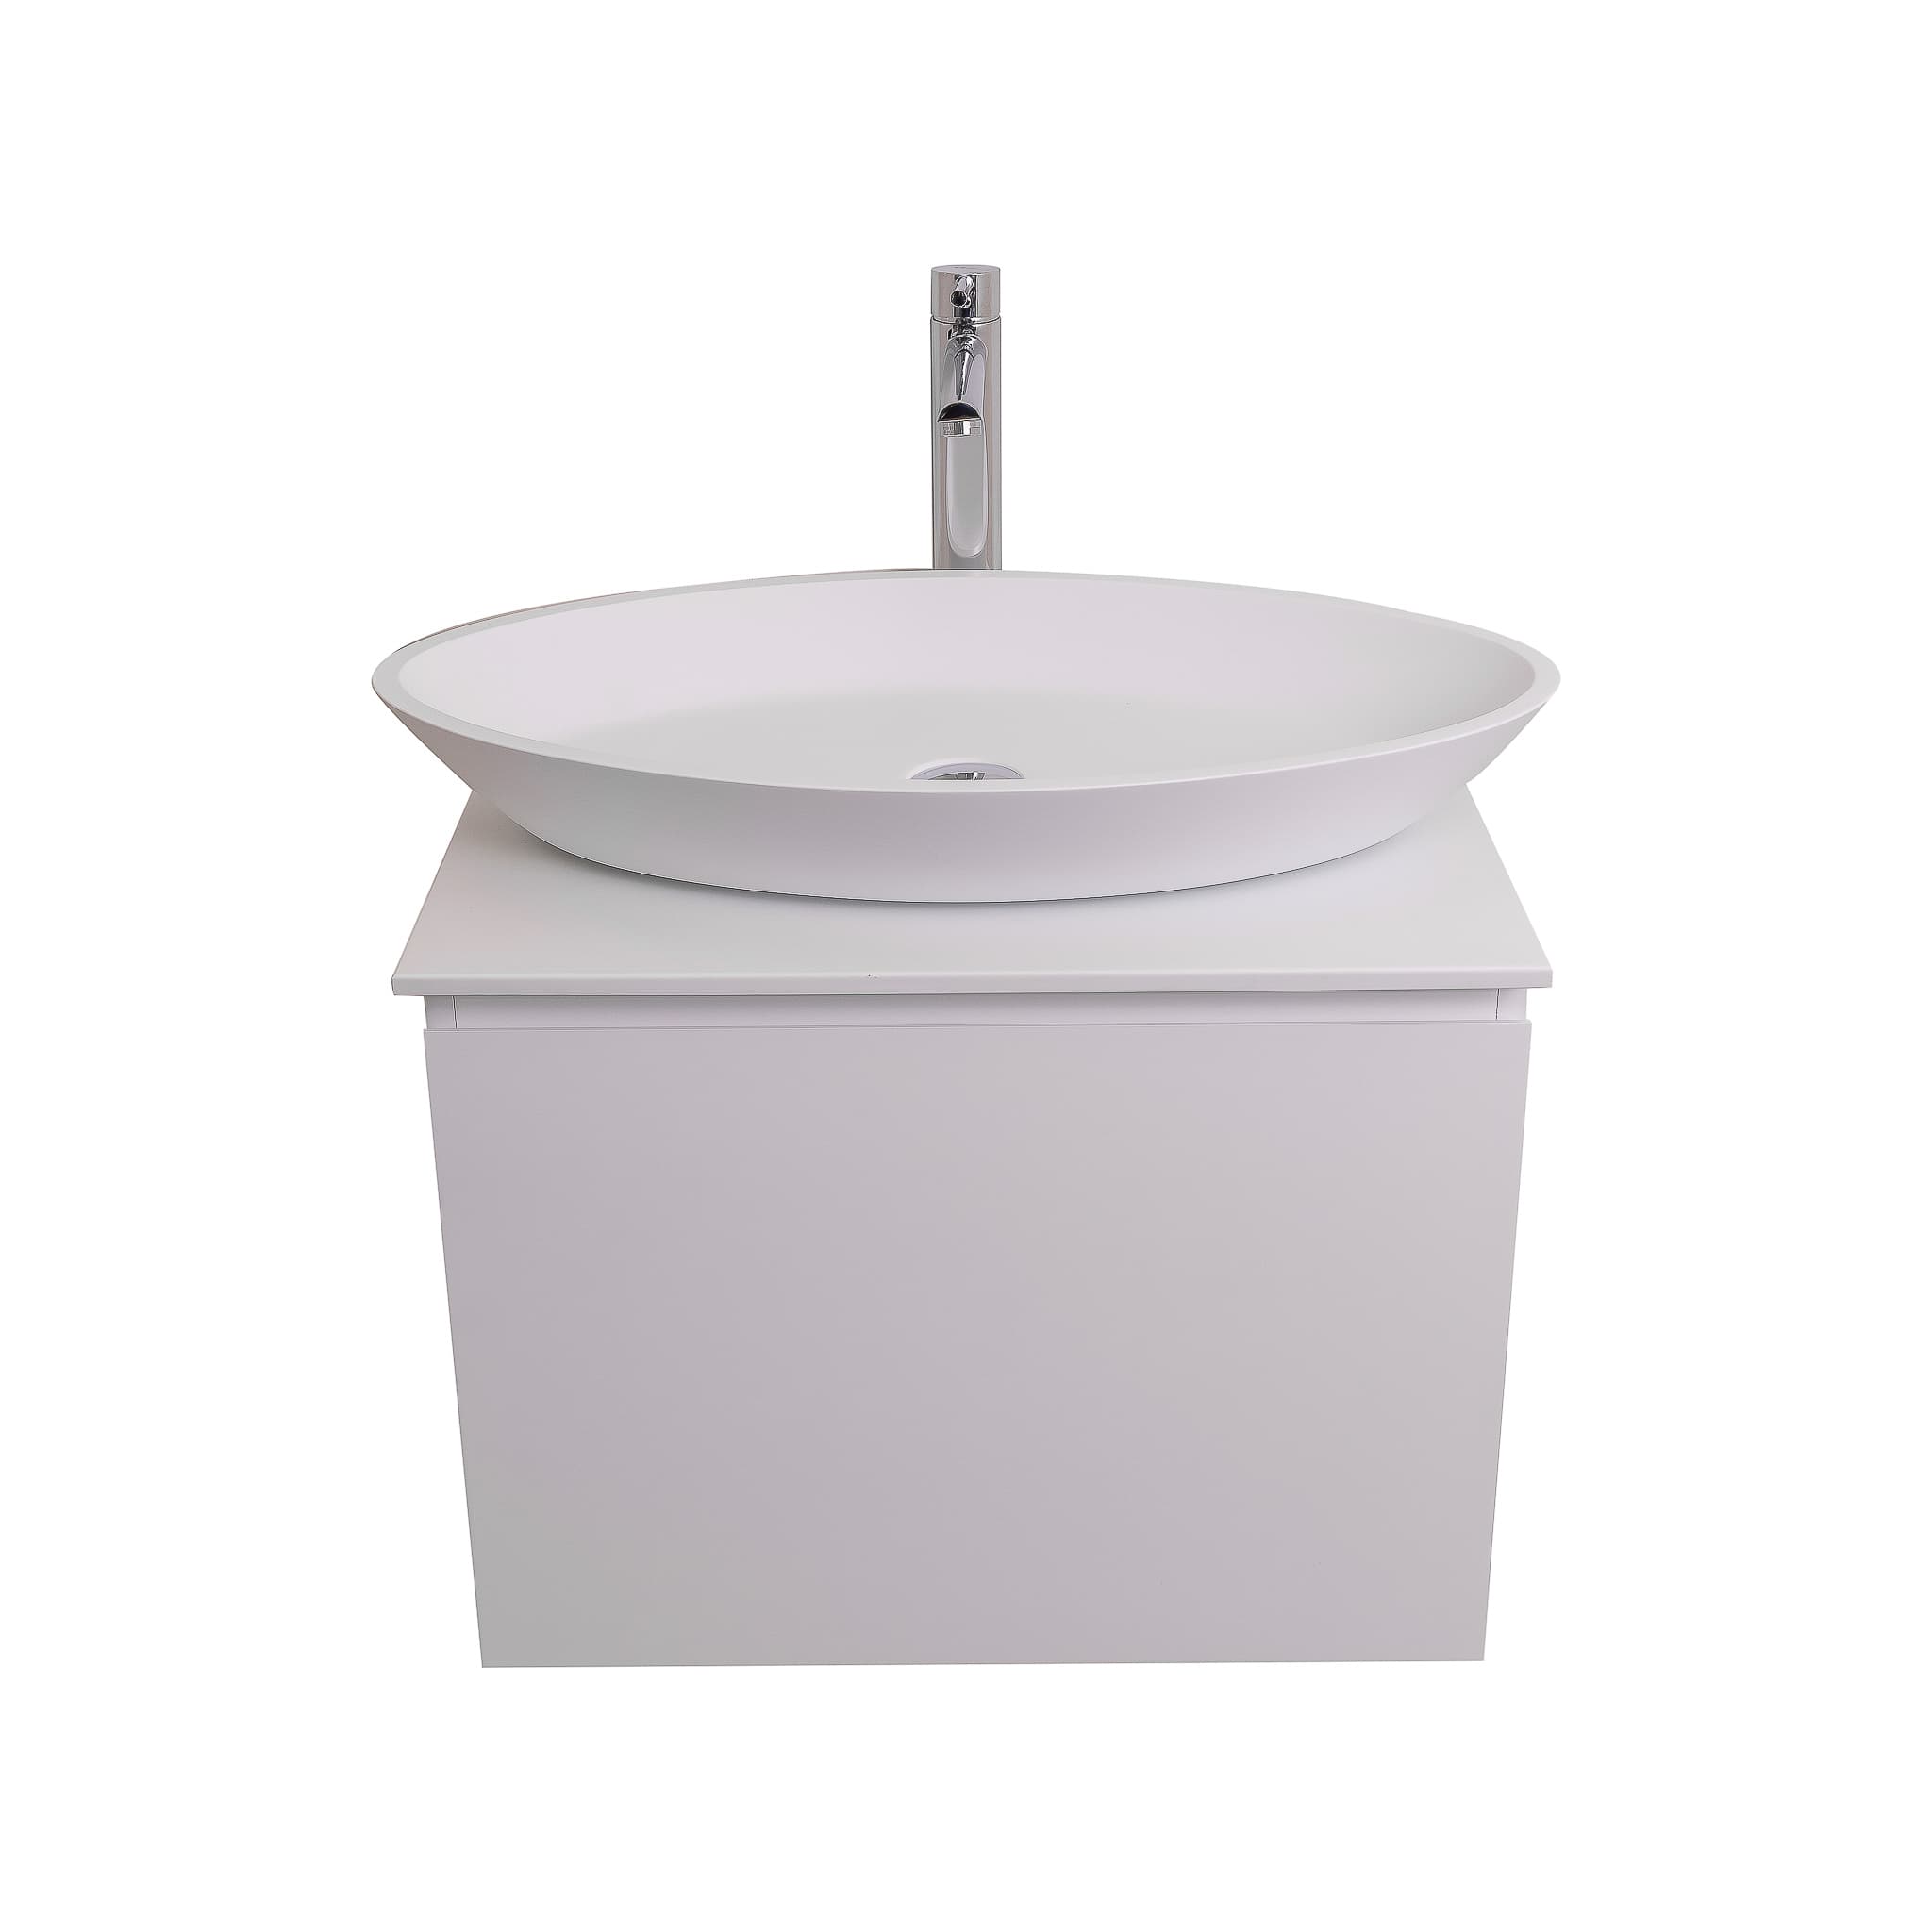 Venice 23.5 White High Gloss Cabinet, Solid Surface Flat White Counter And Oval Solid Surface White Basin 1305, Wall Mounted Modern Vanity Set